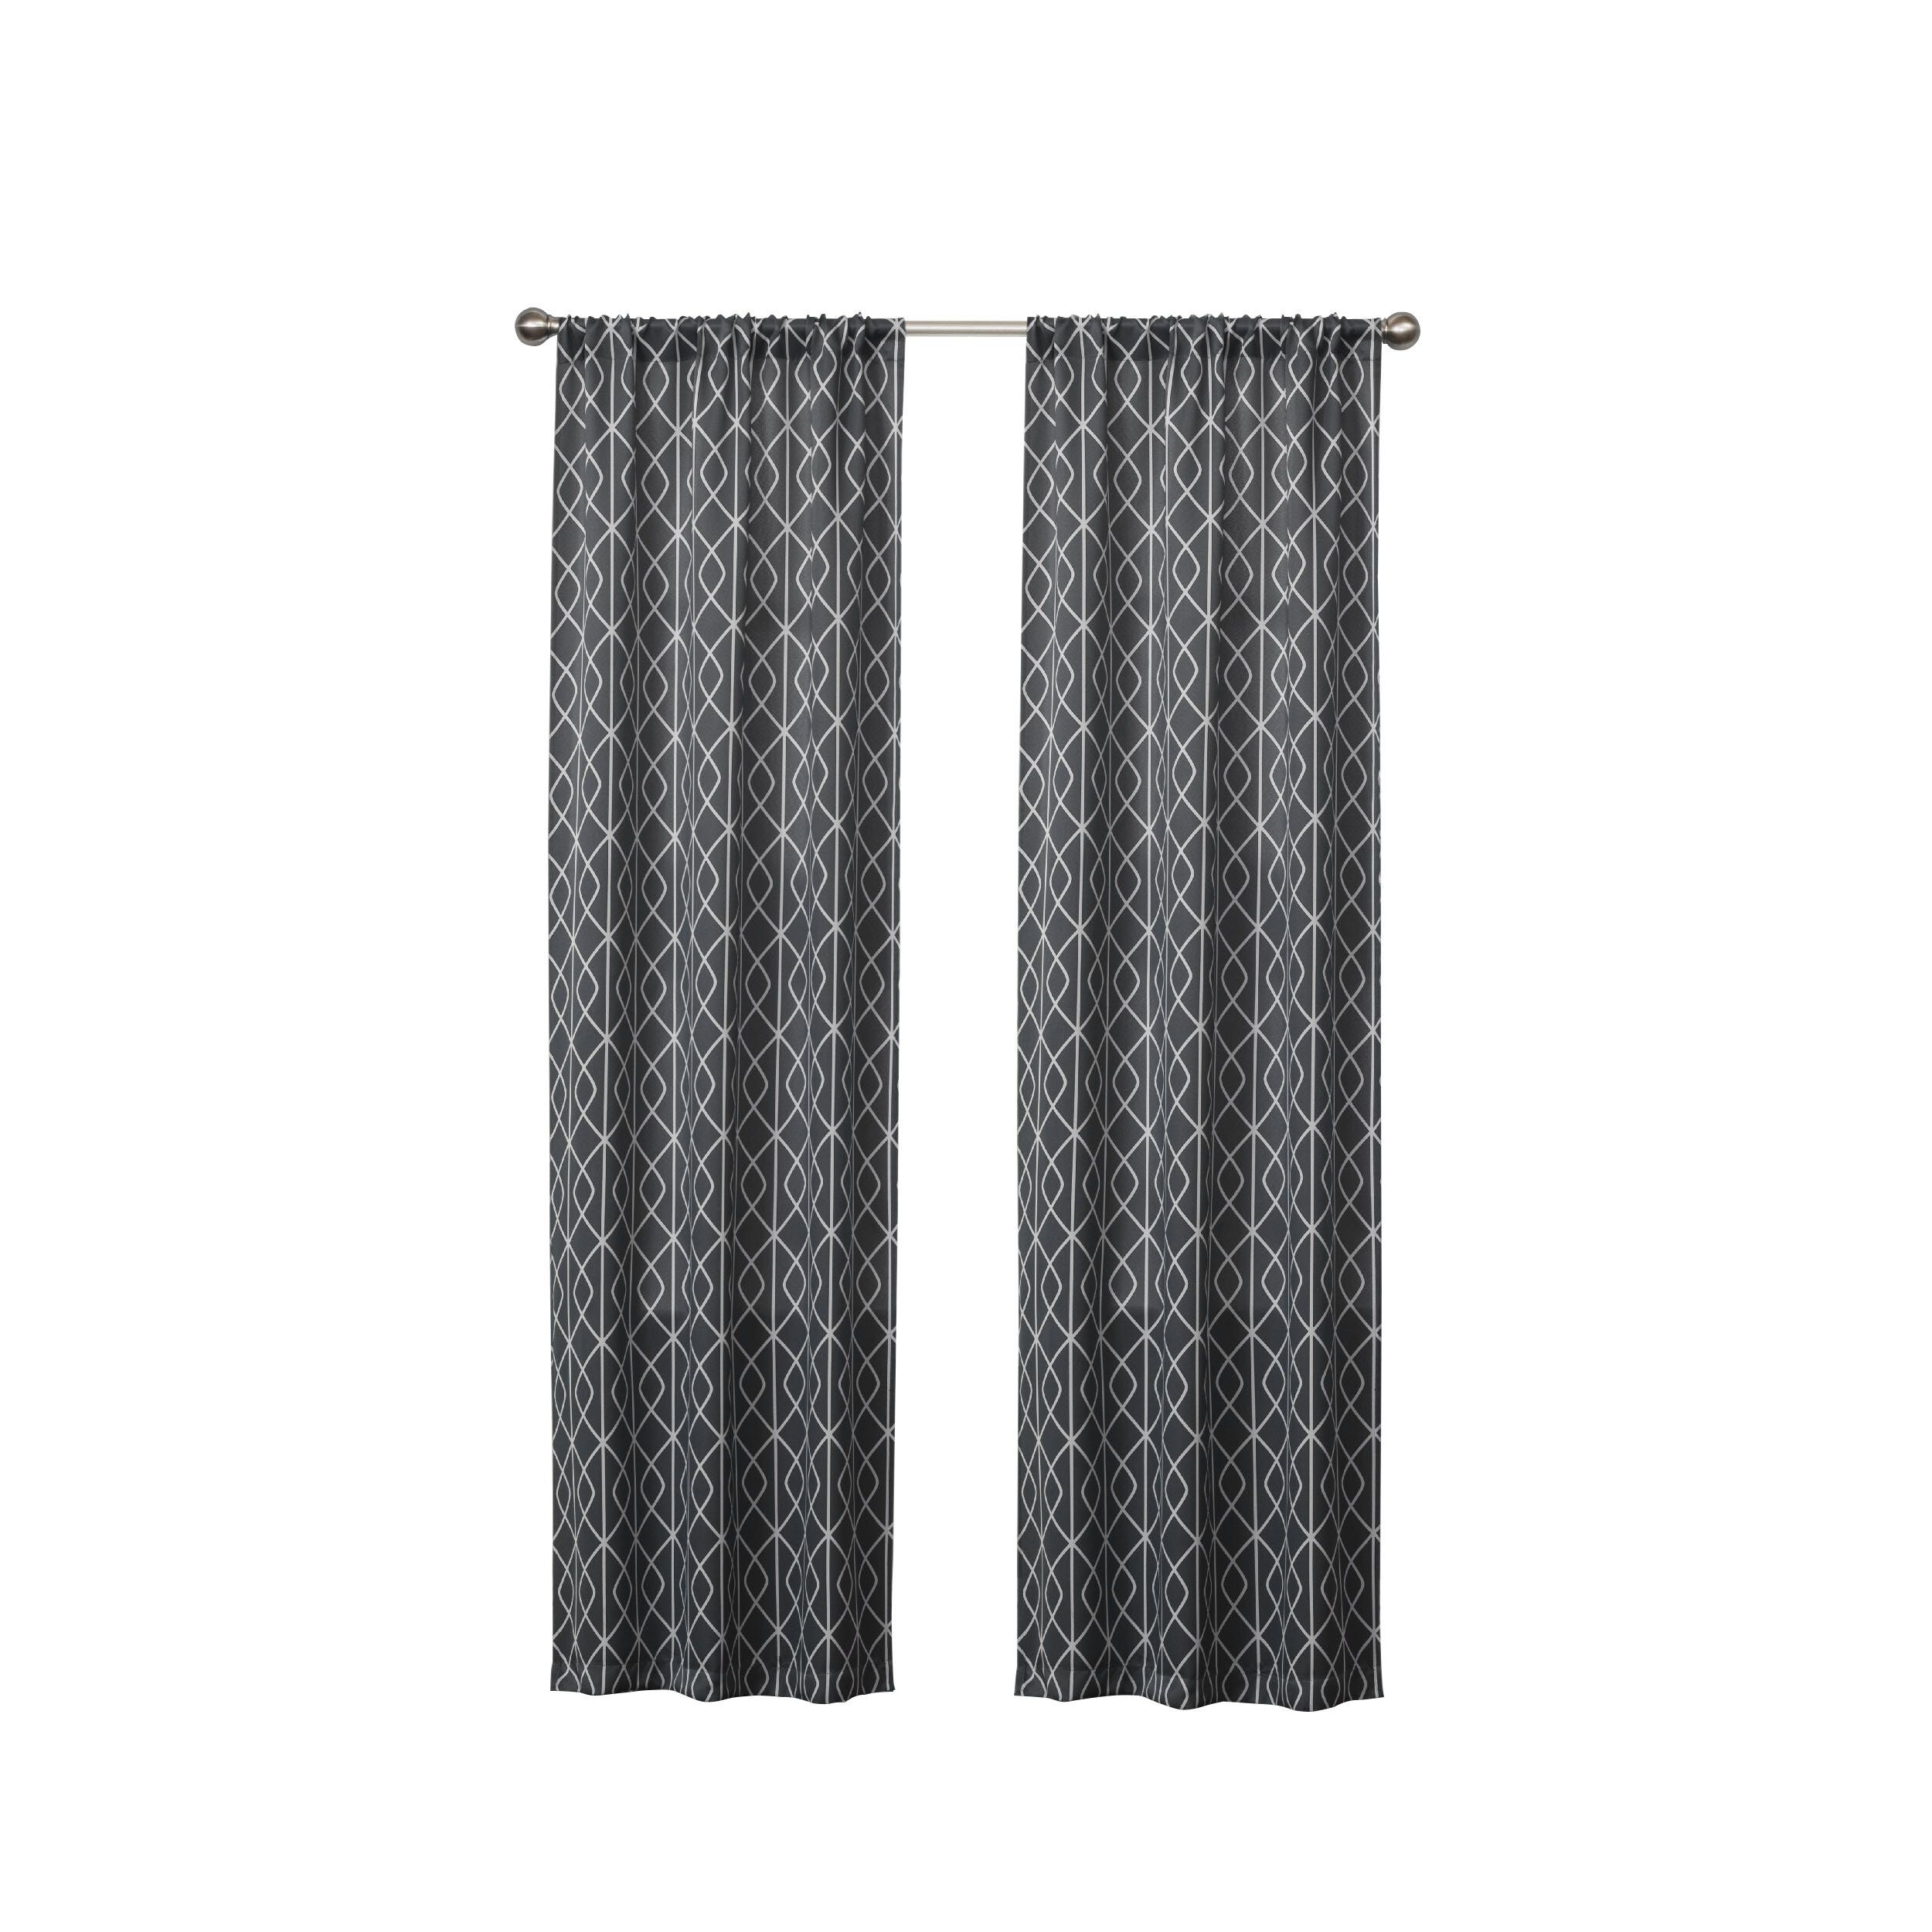 Cogan Geometric Blackout Thermal Rod Pocket Single Curtain Panel Within Geometric Print Textured Thermal Insulated Grommet Curtain Panels (View 13 of 20)